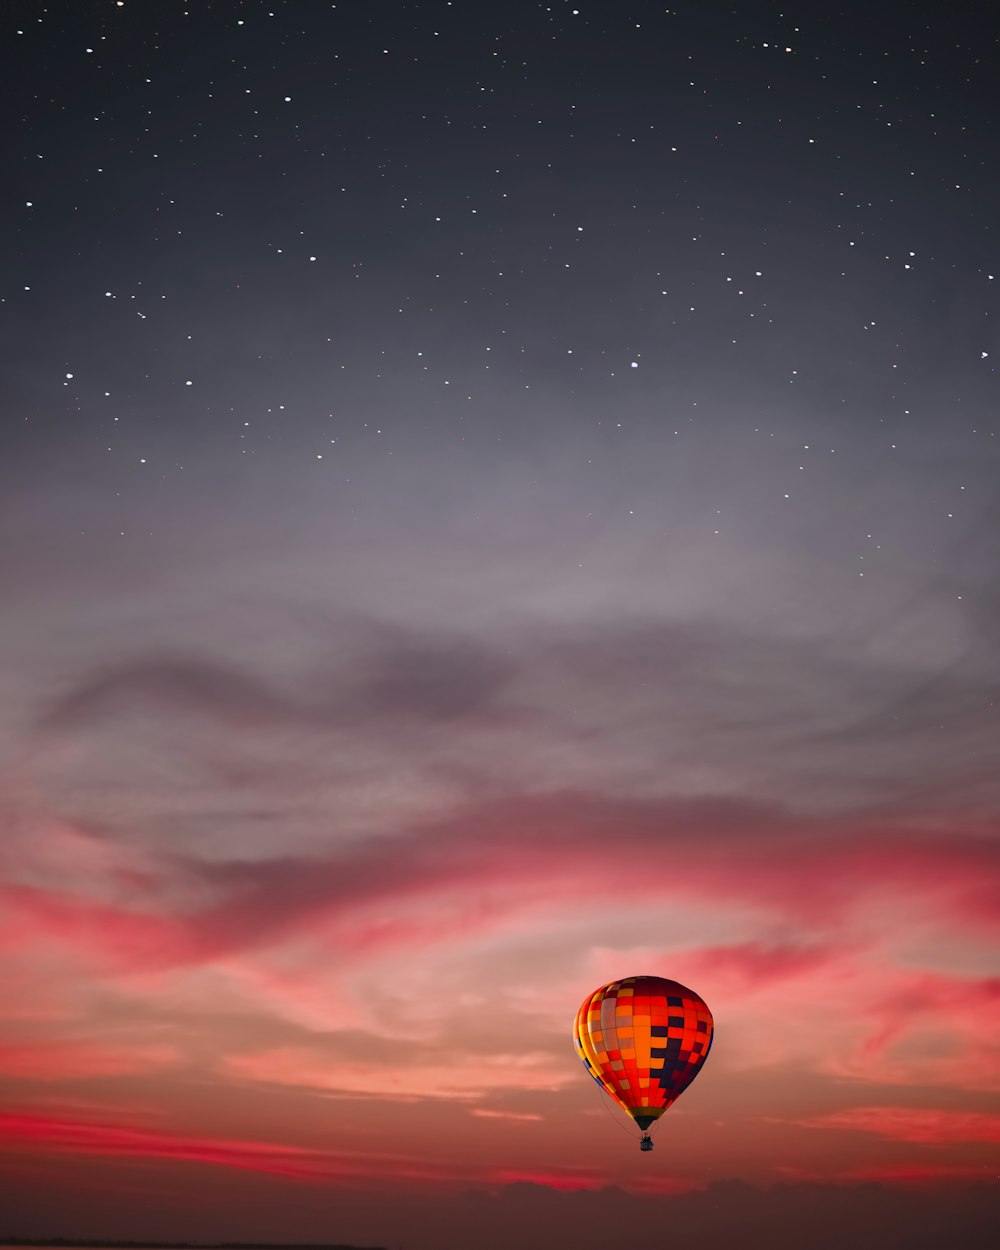 flying multicolored hot air balloon